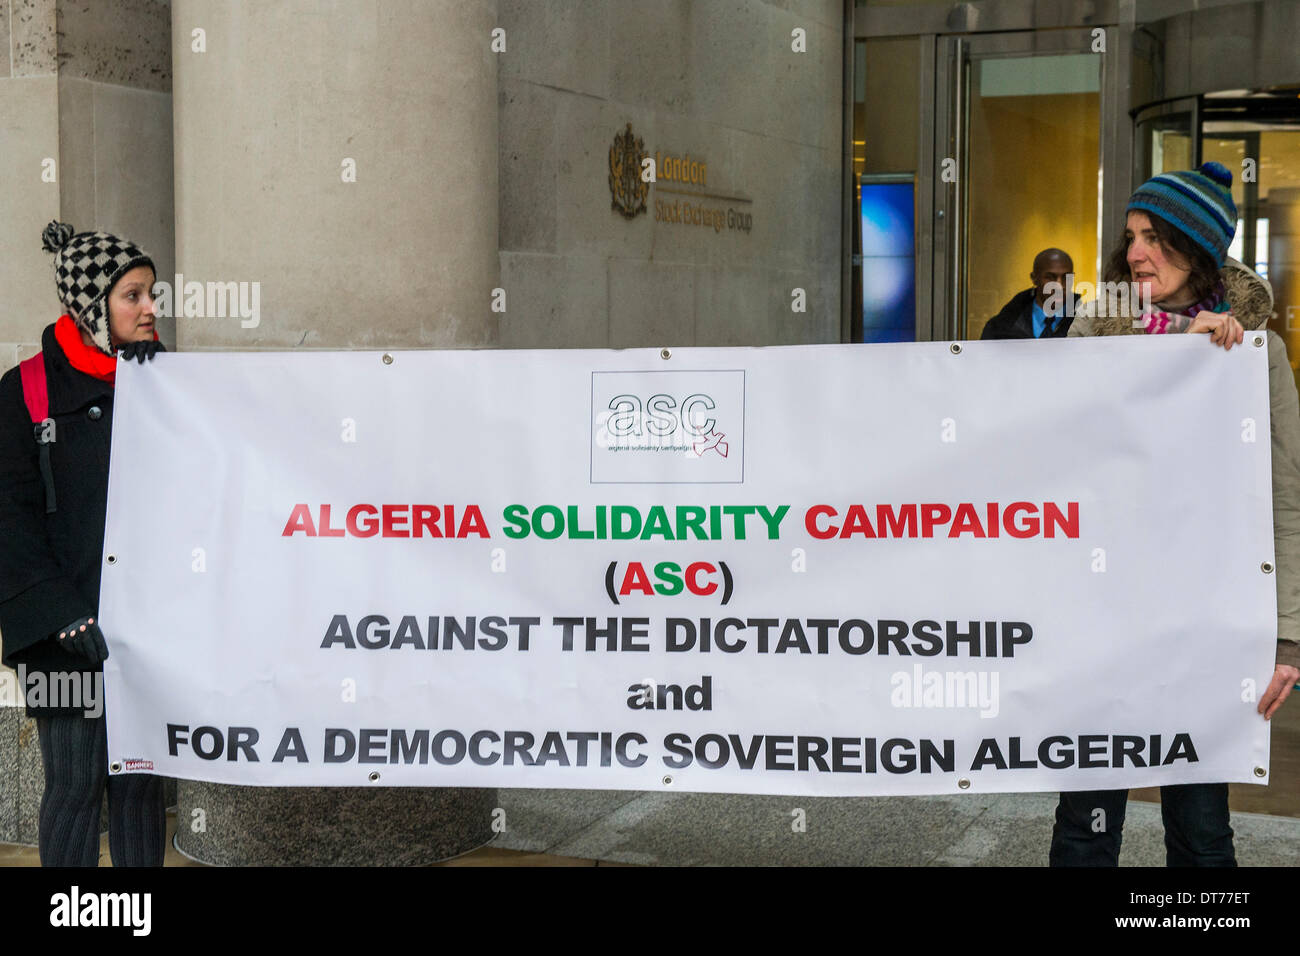 London, UK. 11th February 2014. Human rights protestors from the Algeria Solidarity Campaign (ASC) gather outside the London Stock Exchange to raise awareness about what they call ‘the repressive Algerian regime’ and its links with powerful multinationals such as BP who are keen on its gas reserves. Inside there is a business conference – The Algerian Investor Window – protestors hope to highlight issues about “British collusion with a repressive and corrupt regime for the sake of business interests and securing fossil fuel supplies” with the attendees. Credit:  Guy Bell/Alamy Live News Stock Photo